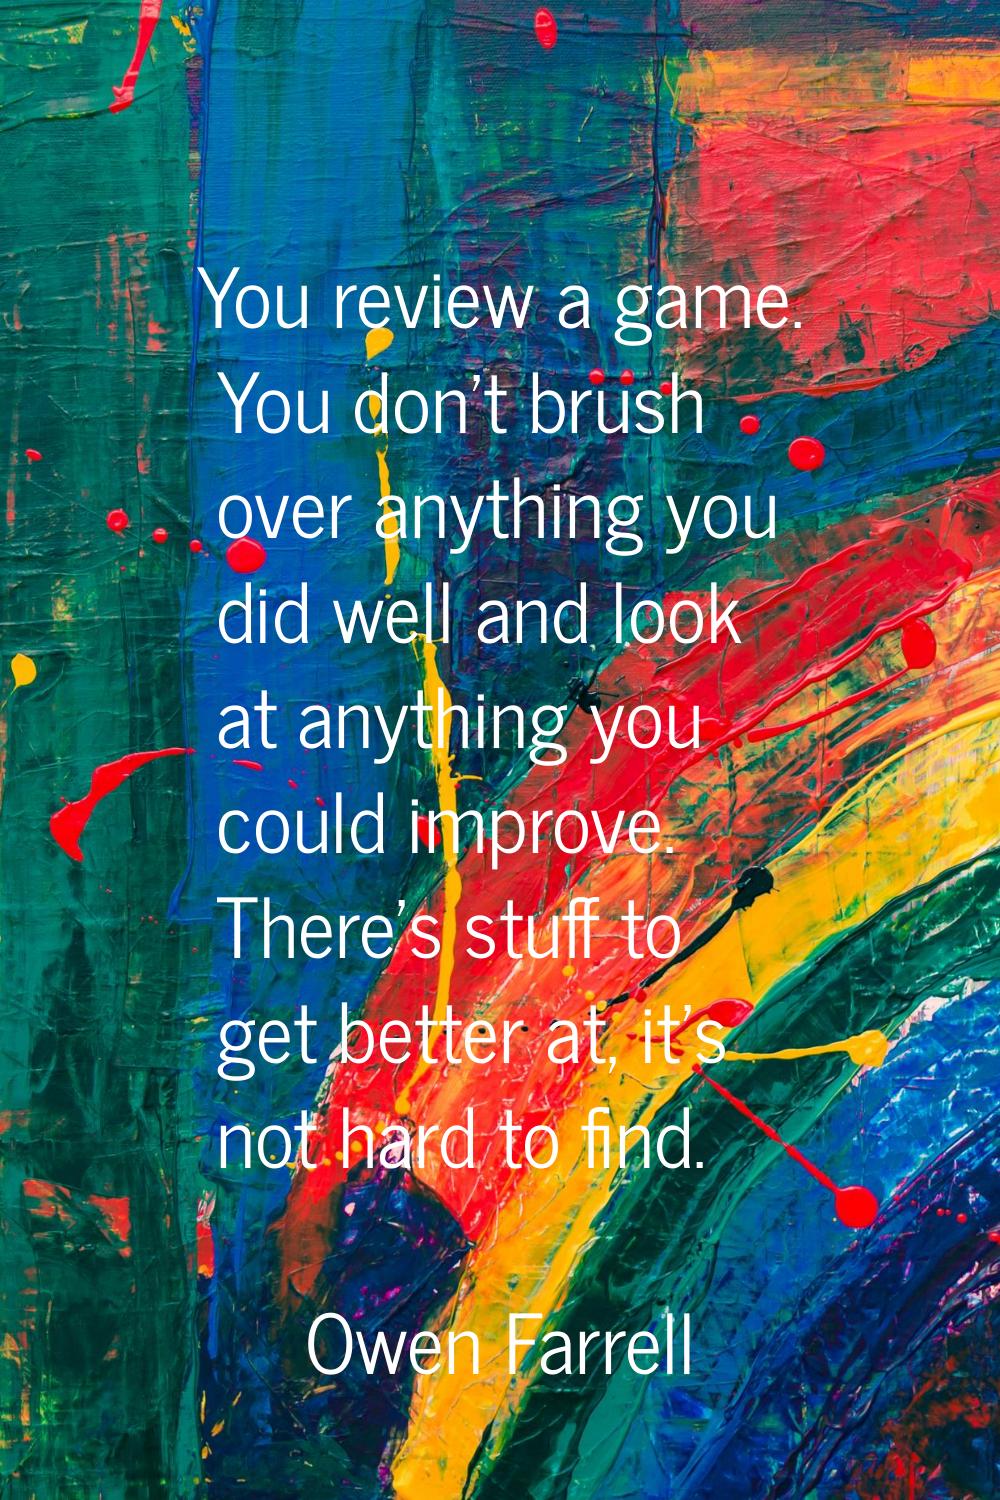 You review a game. You don't brush over anything you did well and look at anything you could improv